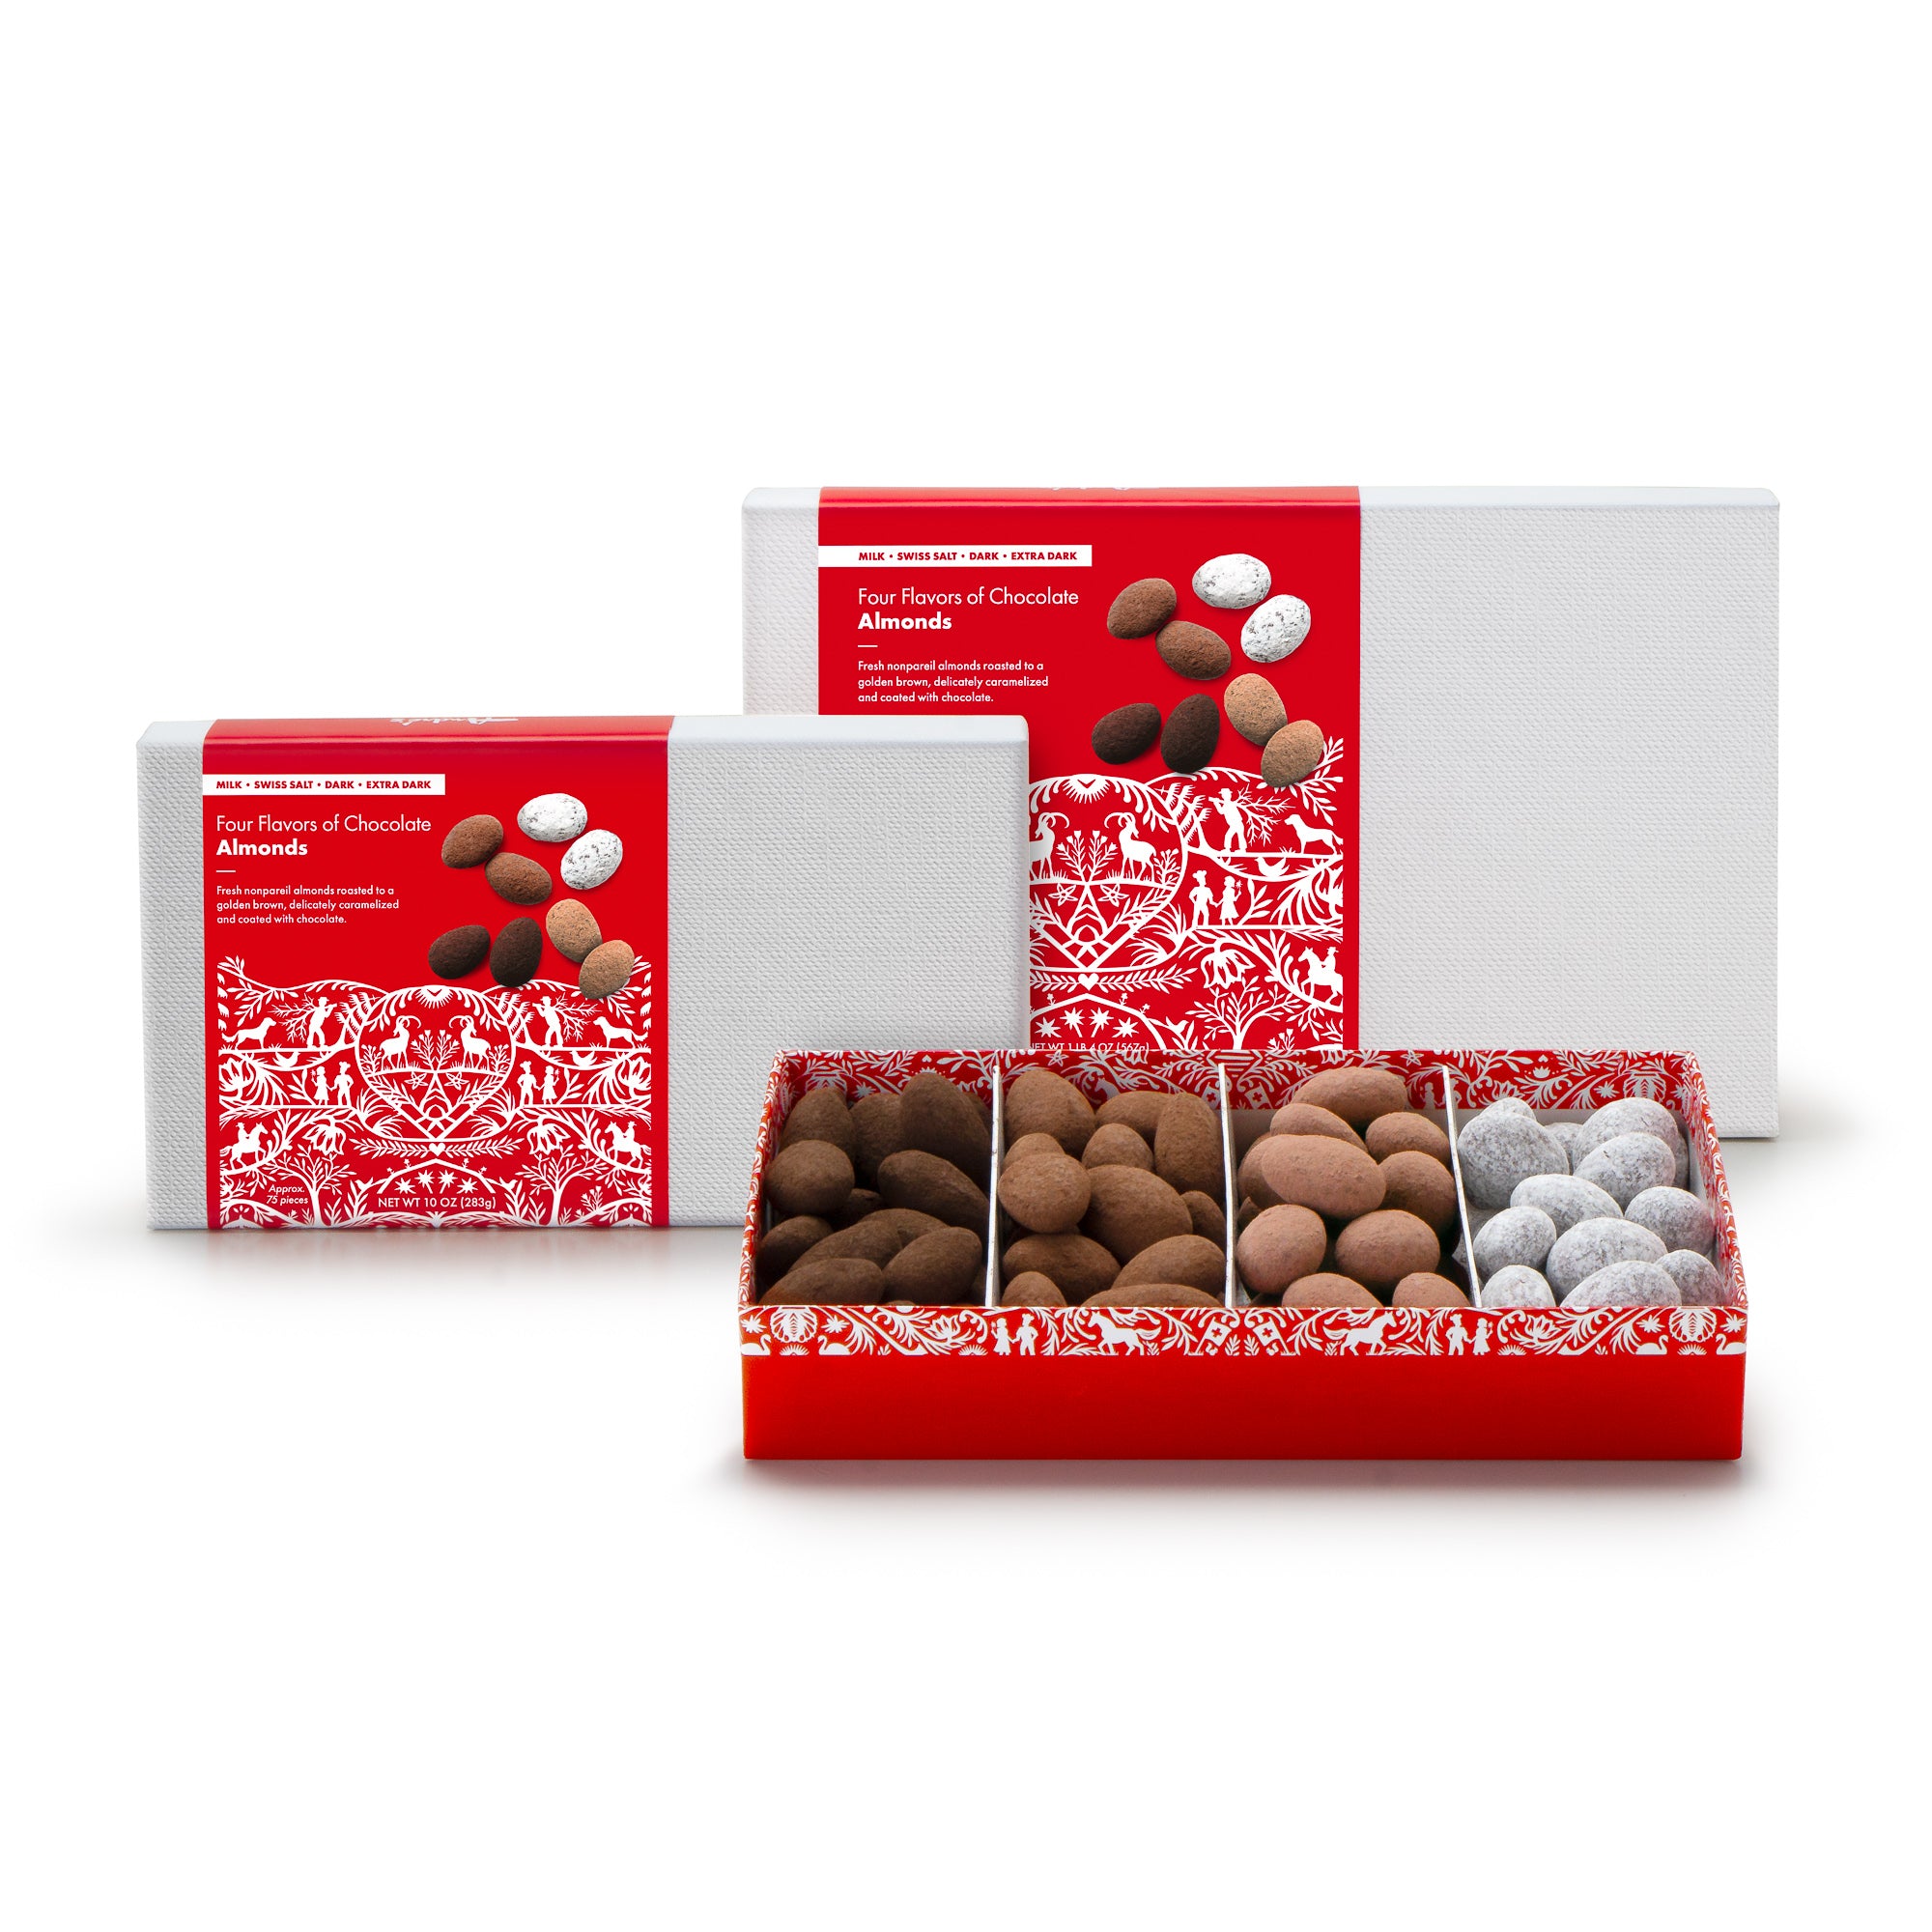 Four Flavors of Chocolate Almonds Box